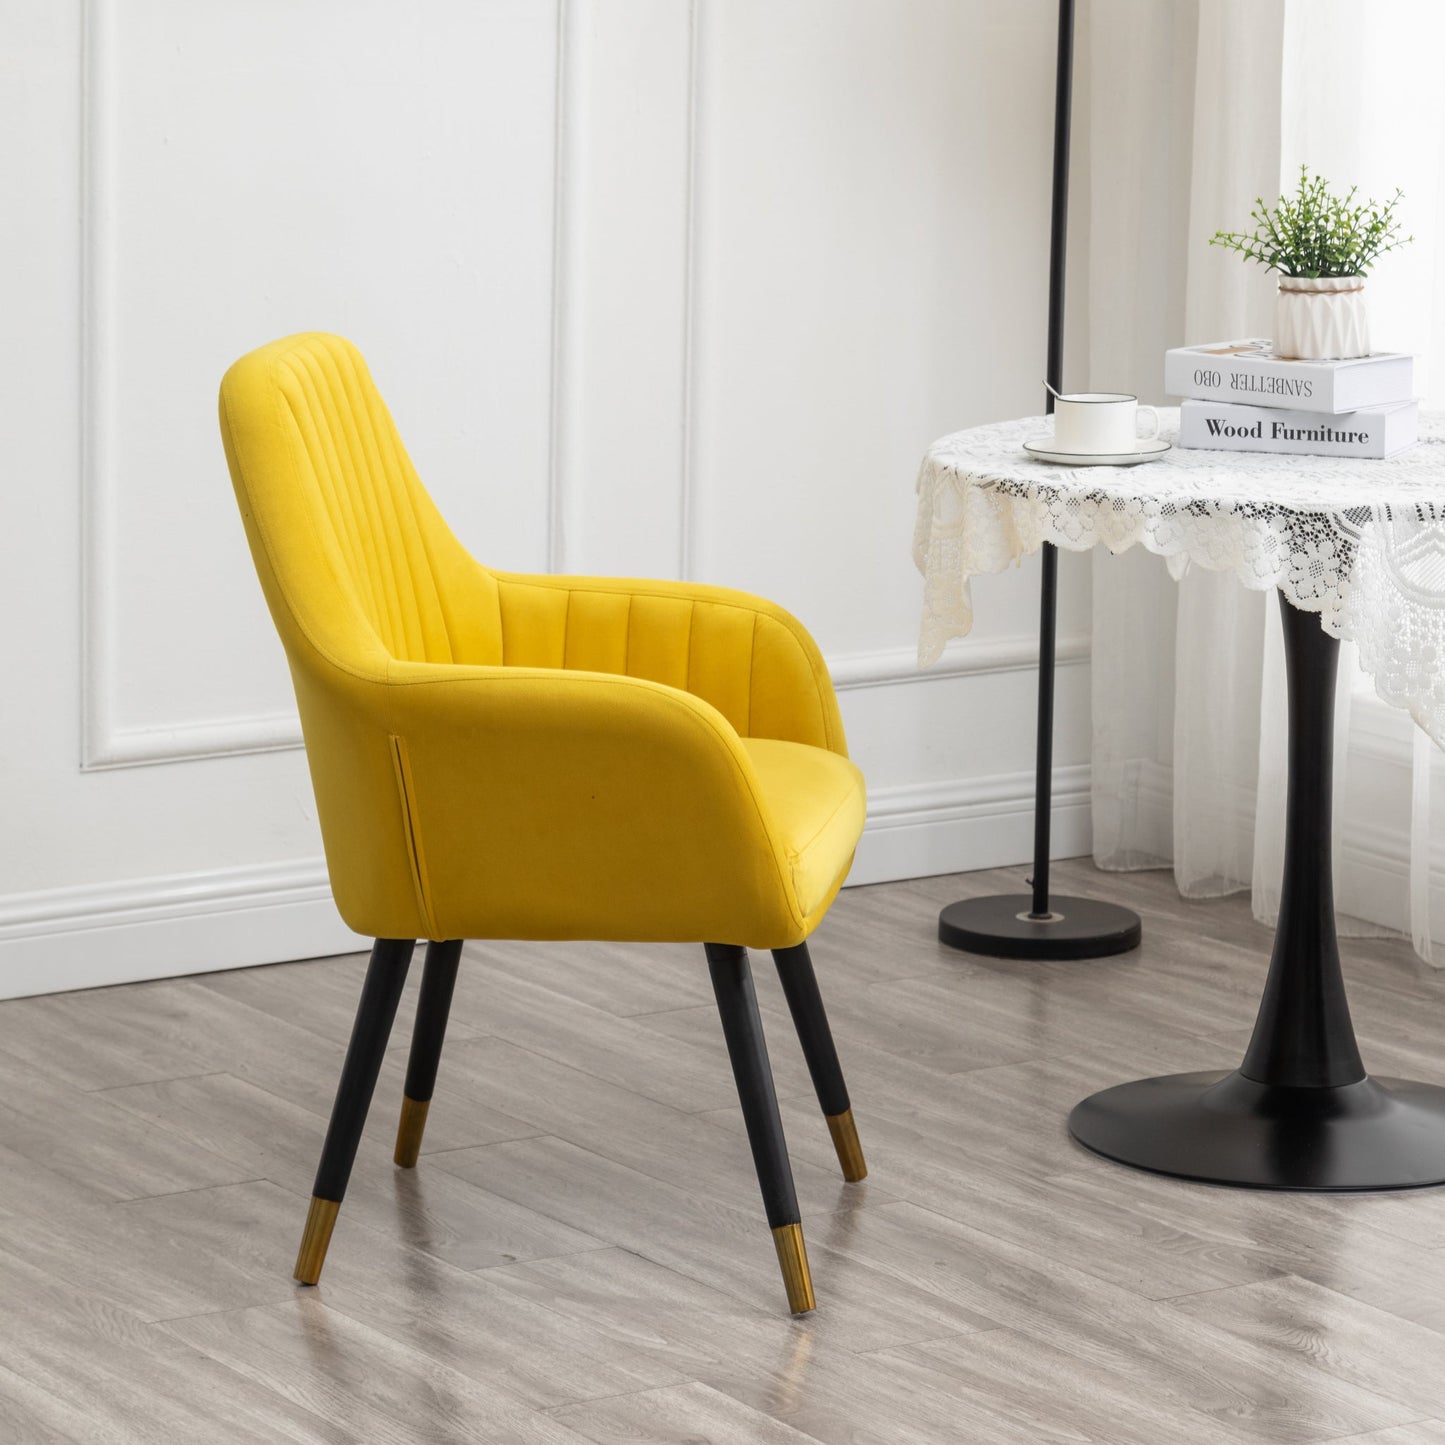 Tuchico Contemporary Velvet Upholstered Accent Chair, Yellow